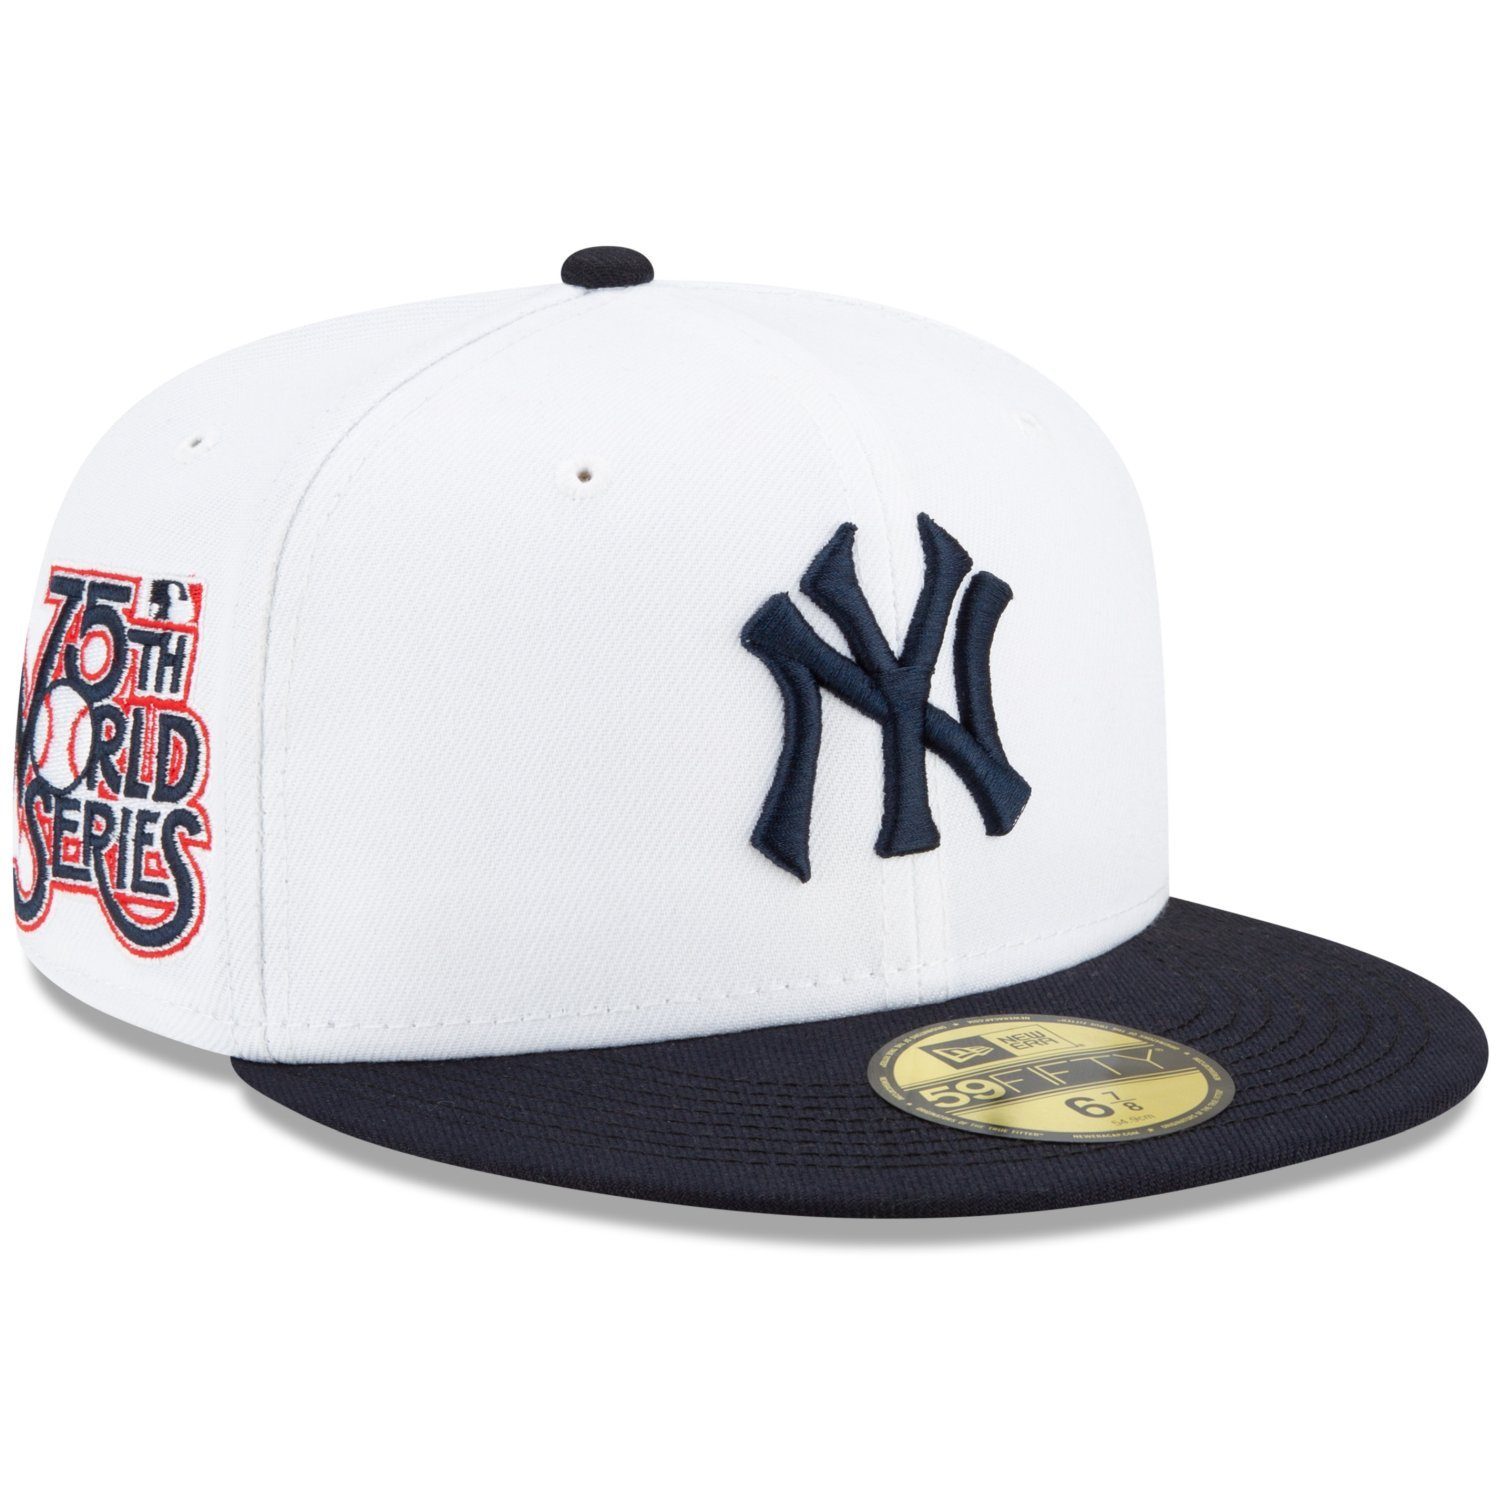 Cap 1975 Era SERIES NY Yankees WORLD New 59Fifty Fitted